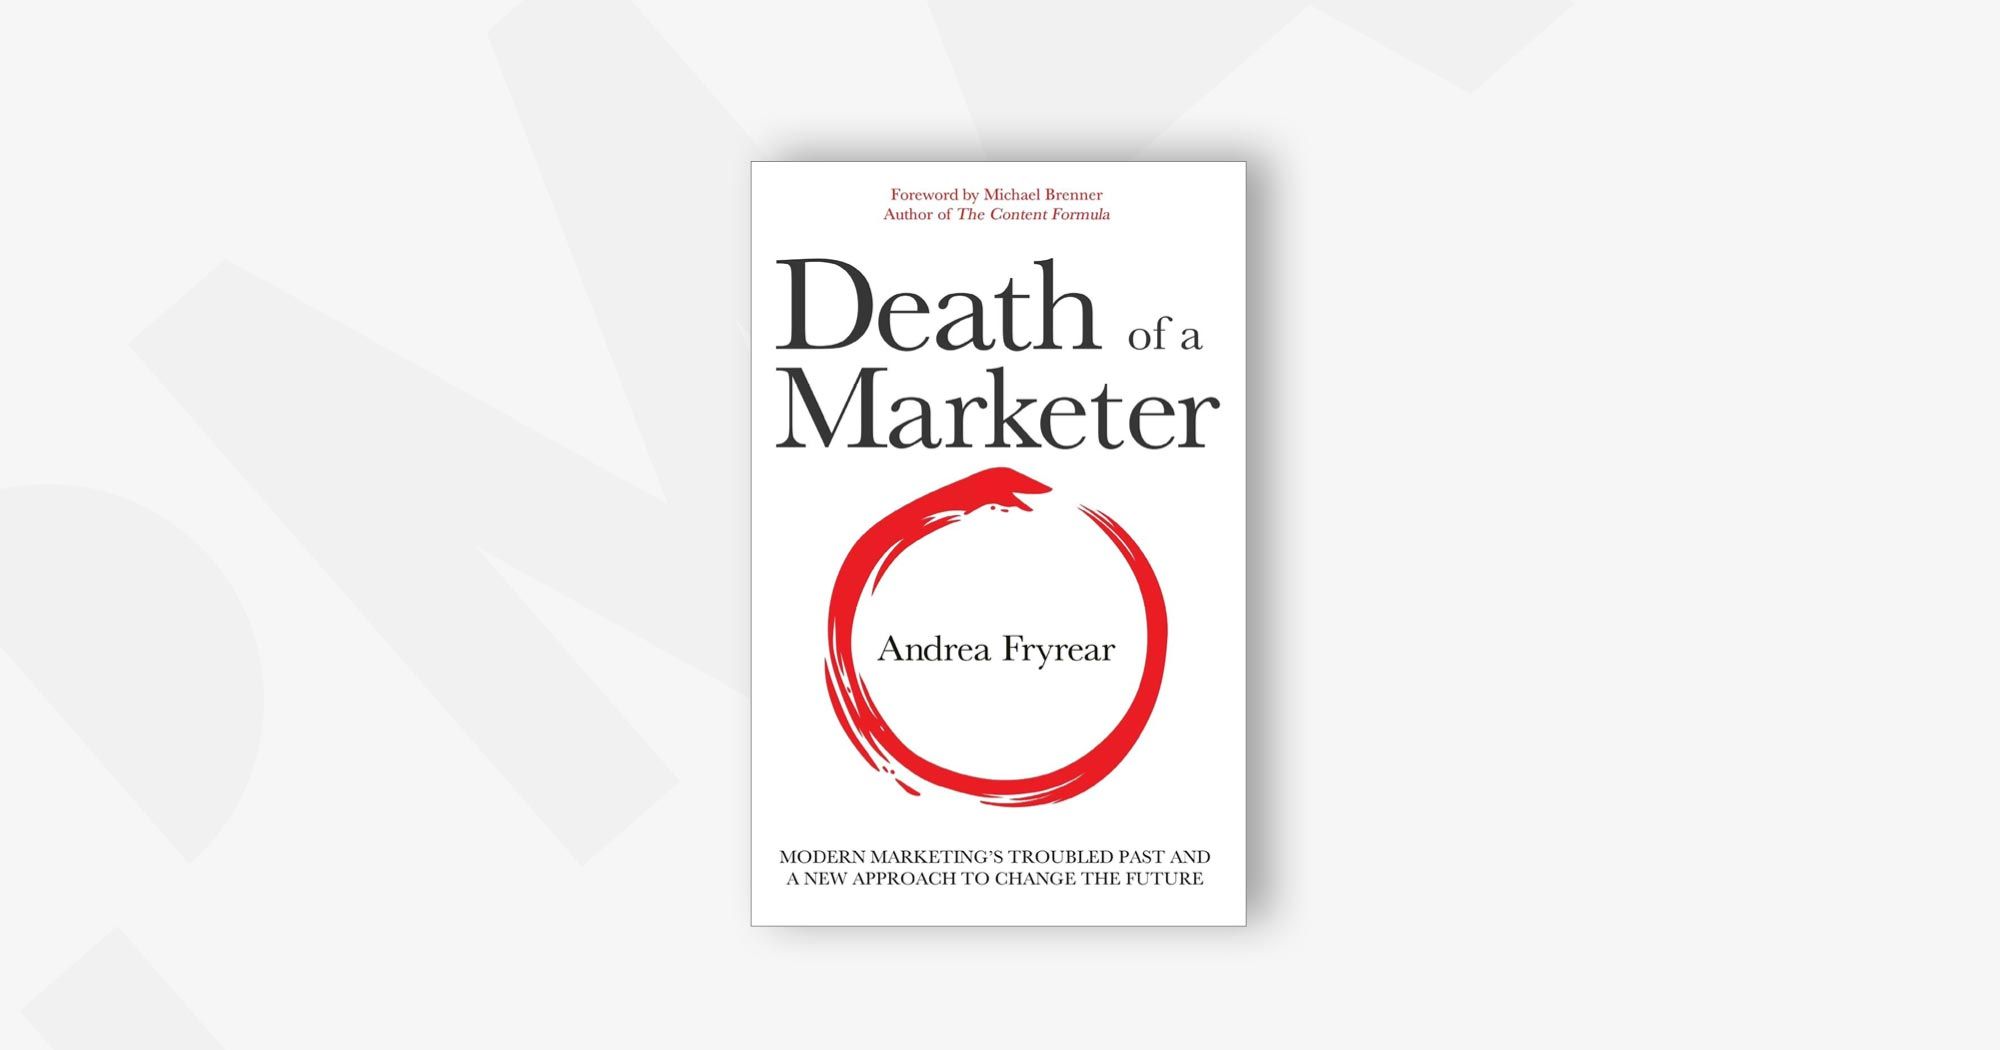 Death of a Marketer: Modern Marketing's Troubled Past and a New Approach to Change the Future – Andrea Fryrear